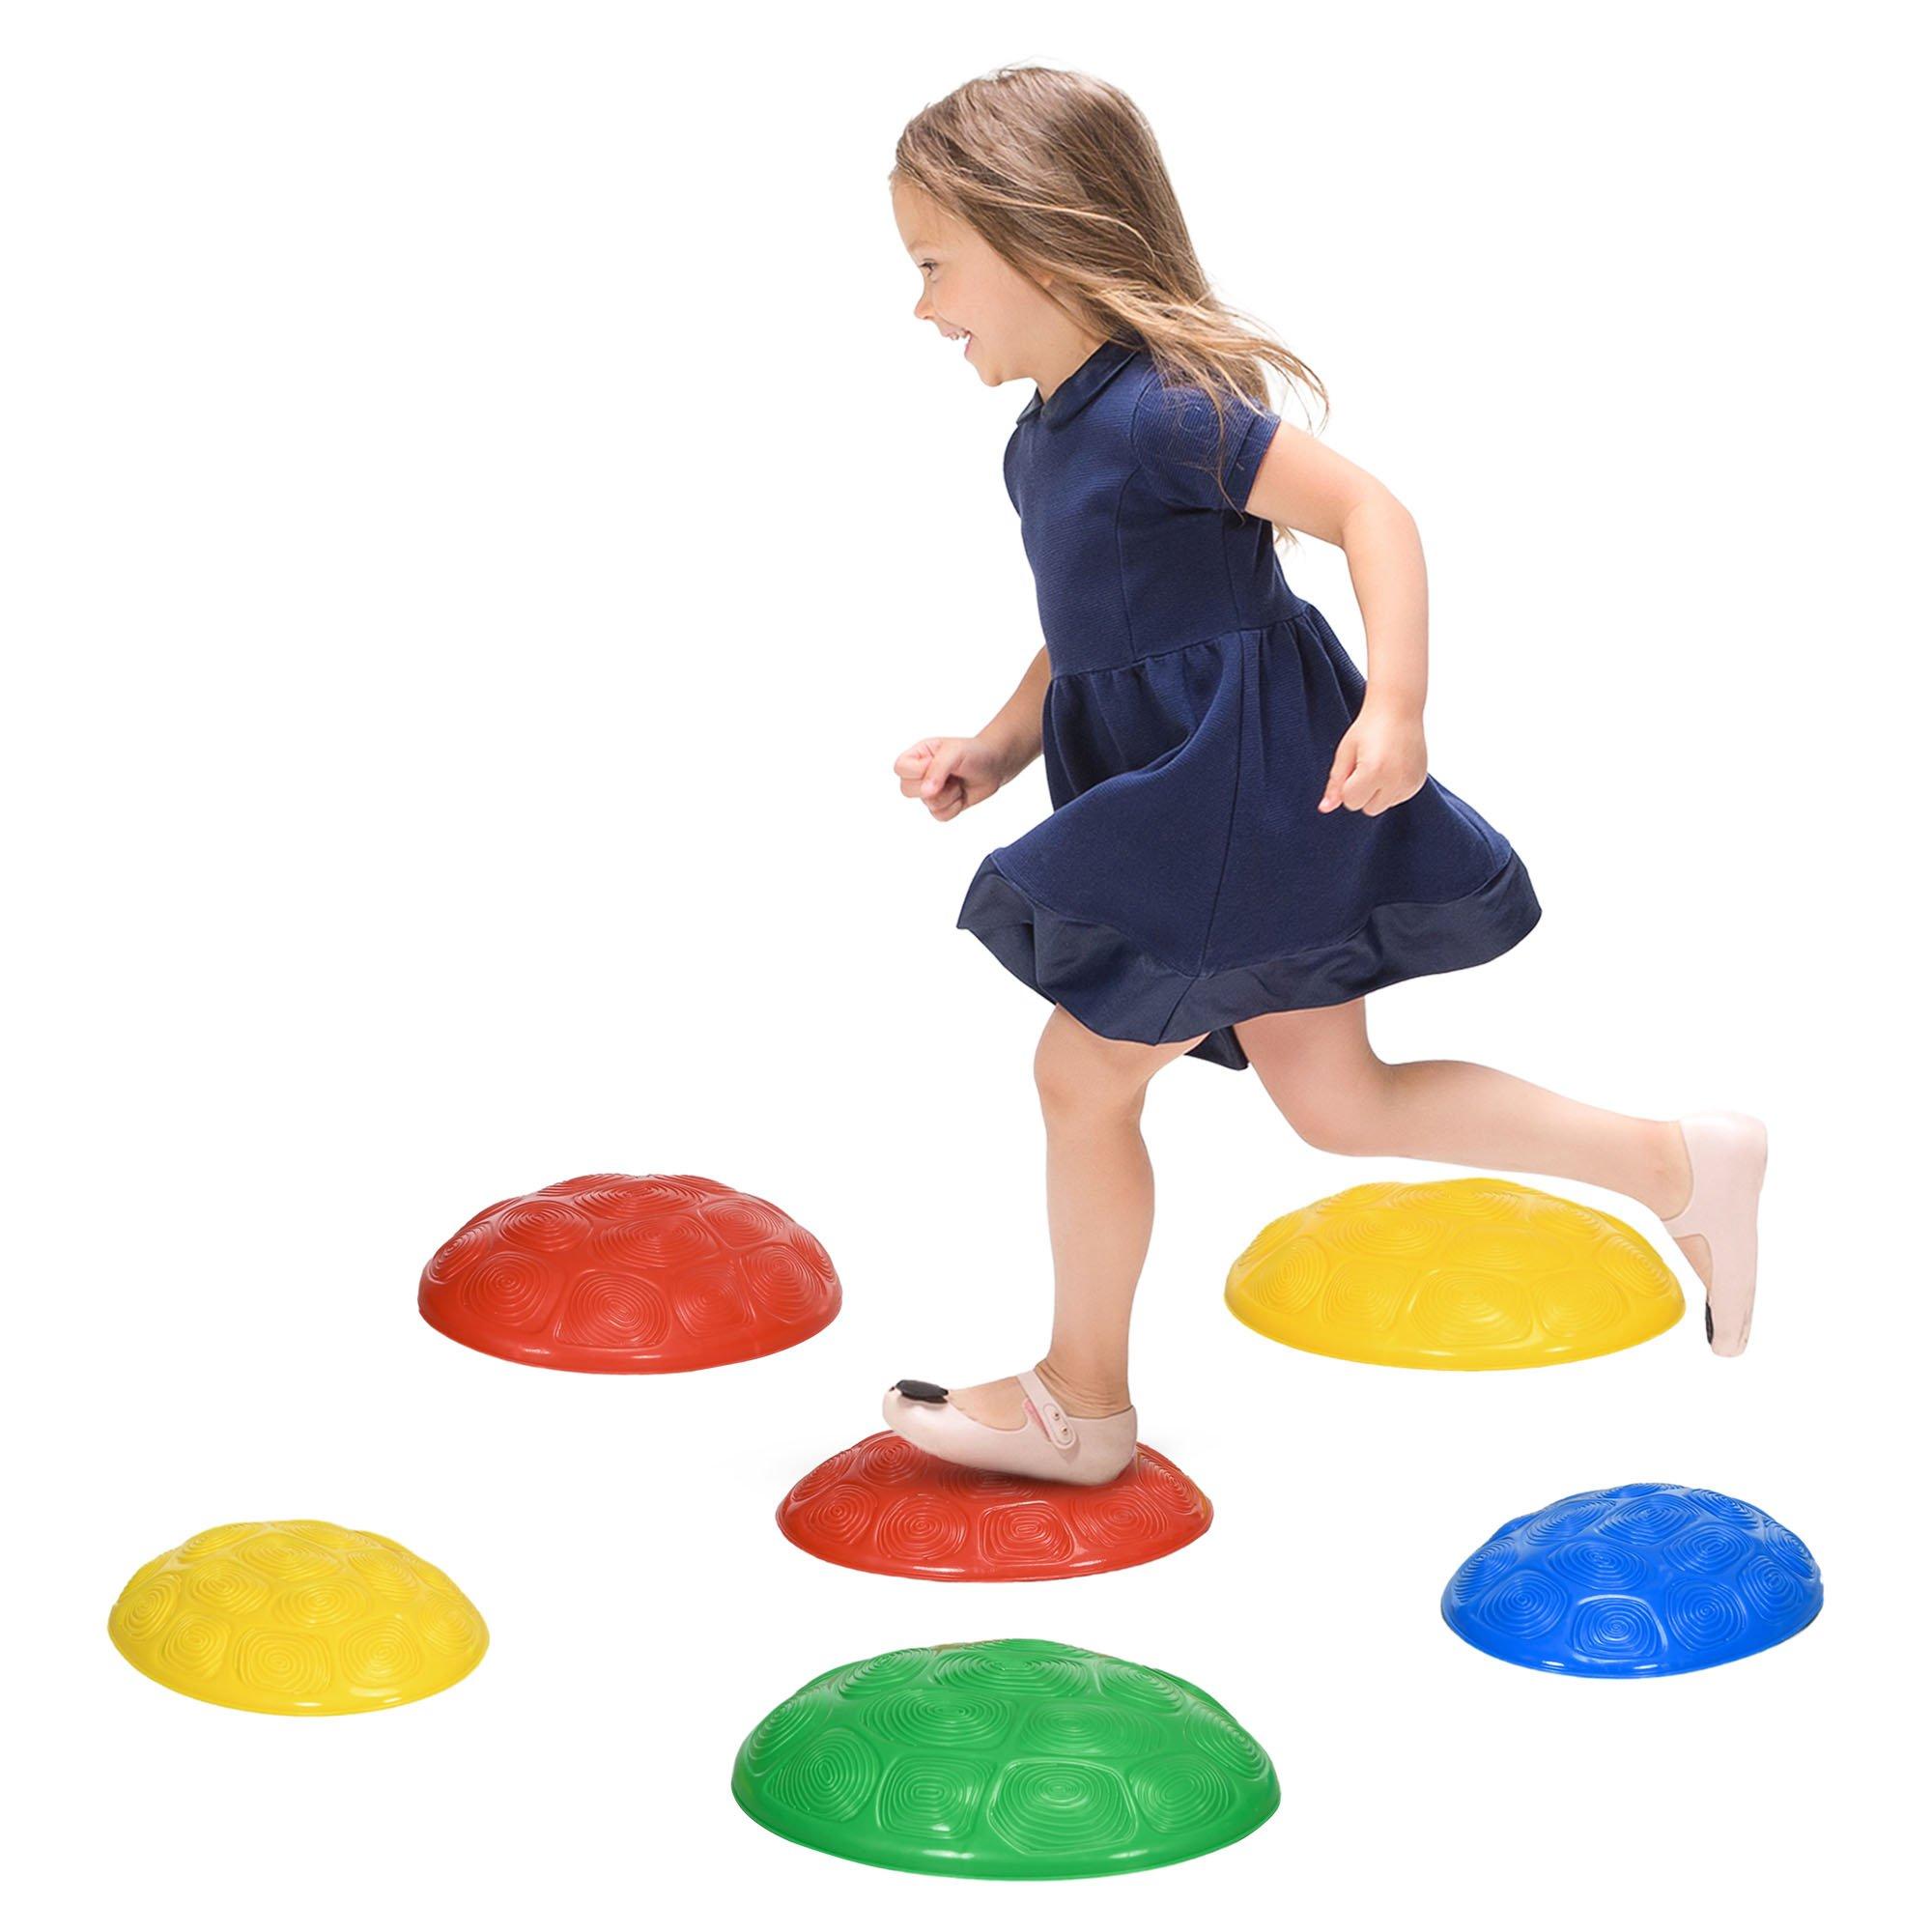 Balance River Stones with Non-Slip Mats for Ages 3-8 Years